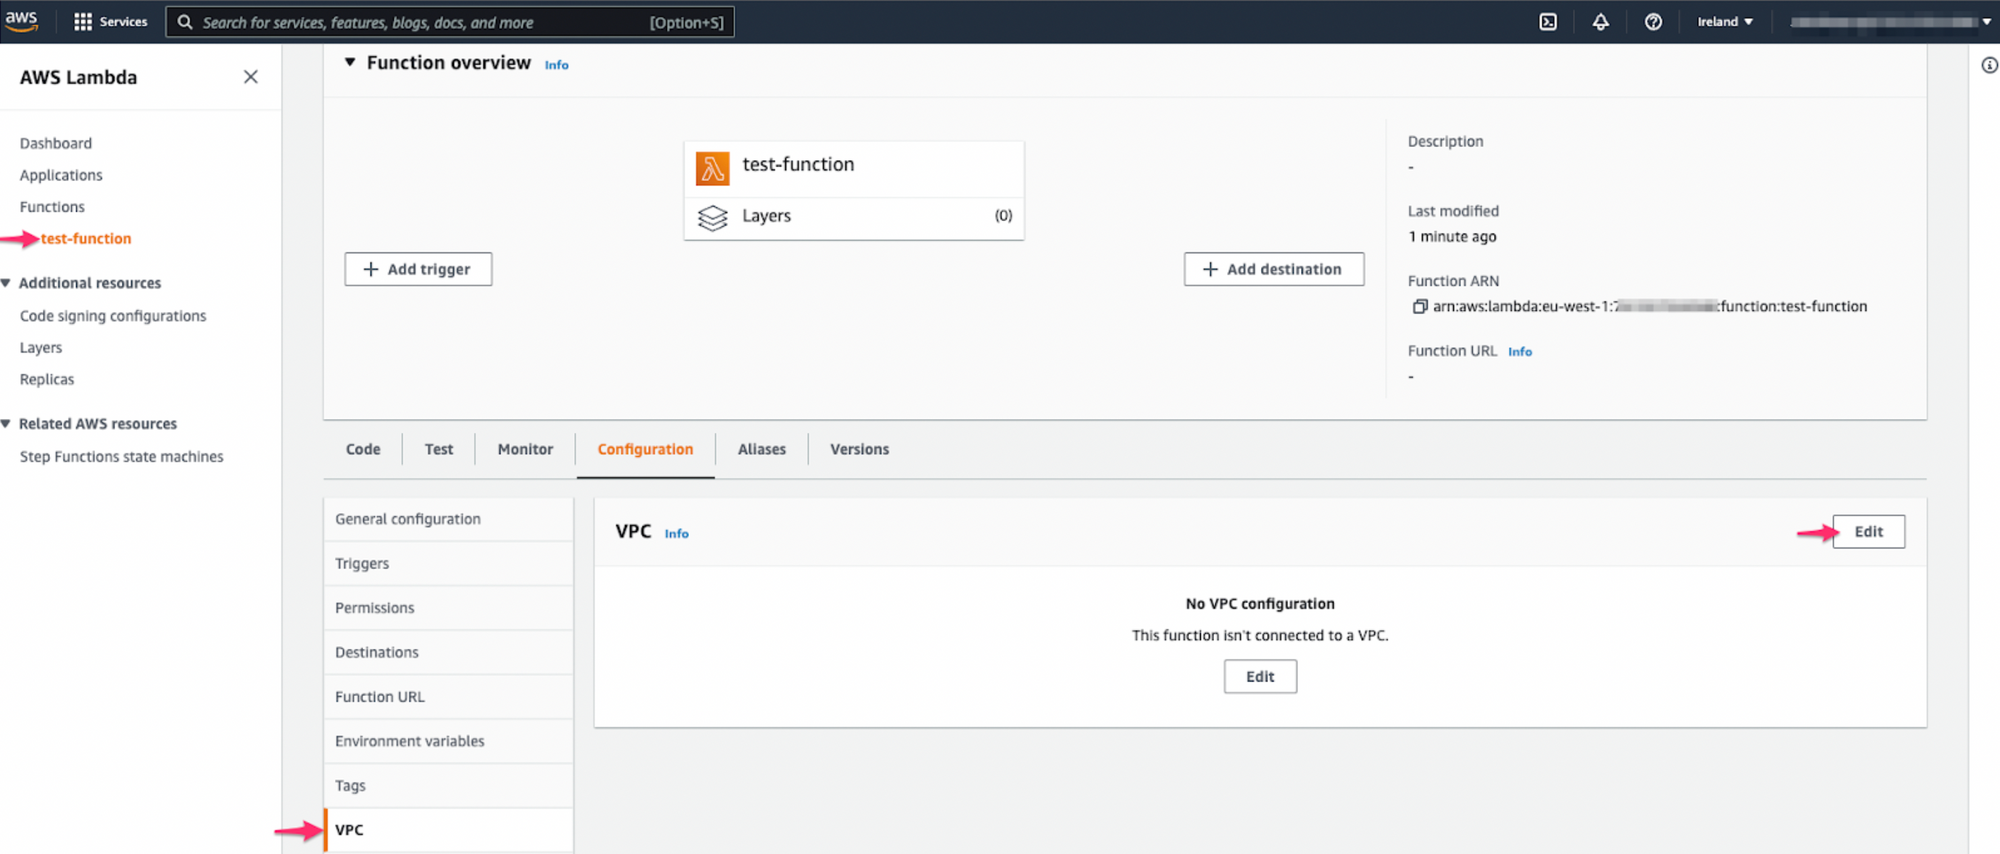 Enabling VPC for your existing AWS Lambda functions.